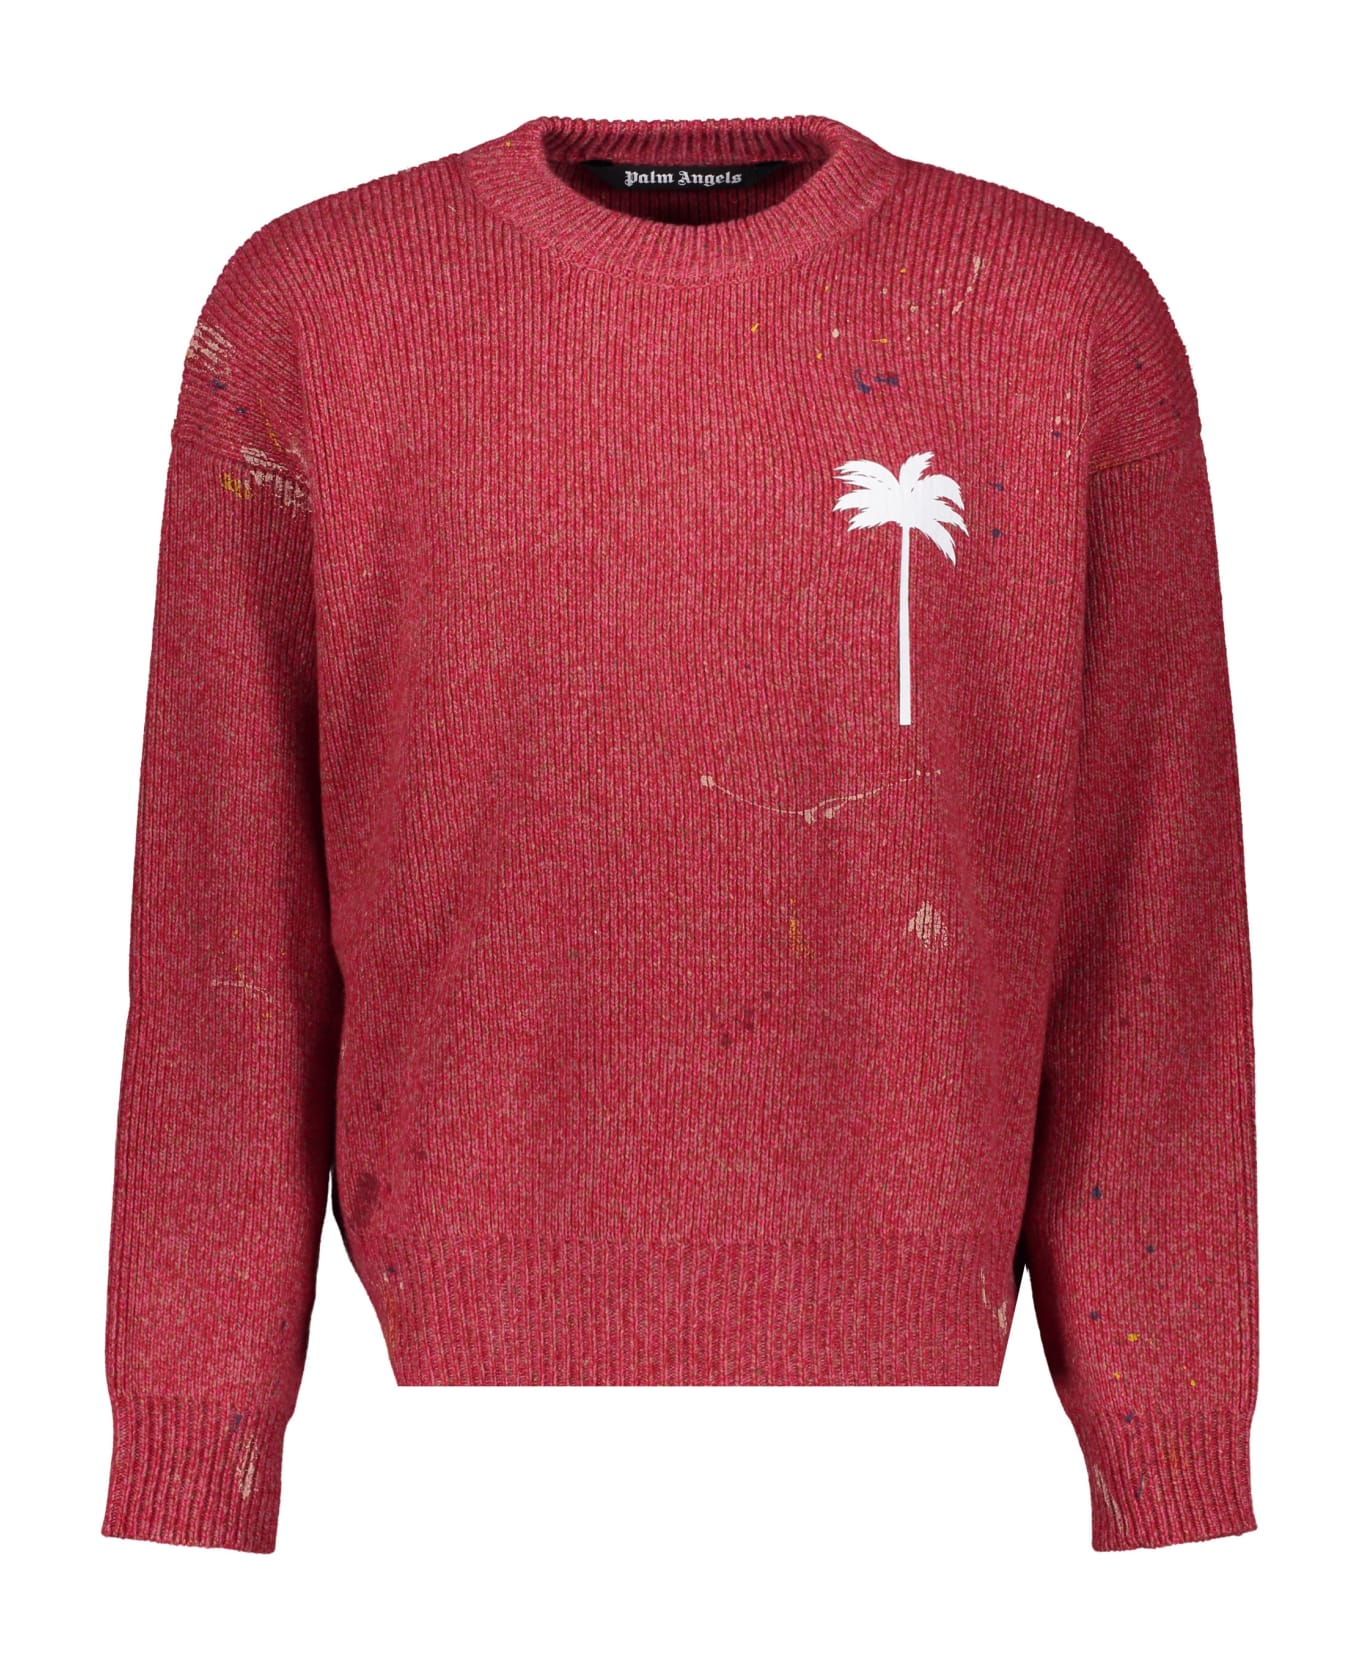 Palm Angels Long Sleeve Crew-neck Sweater - red ニットウェア